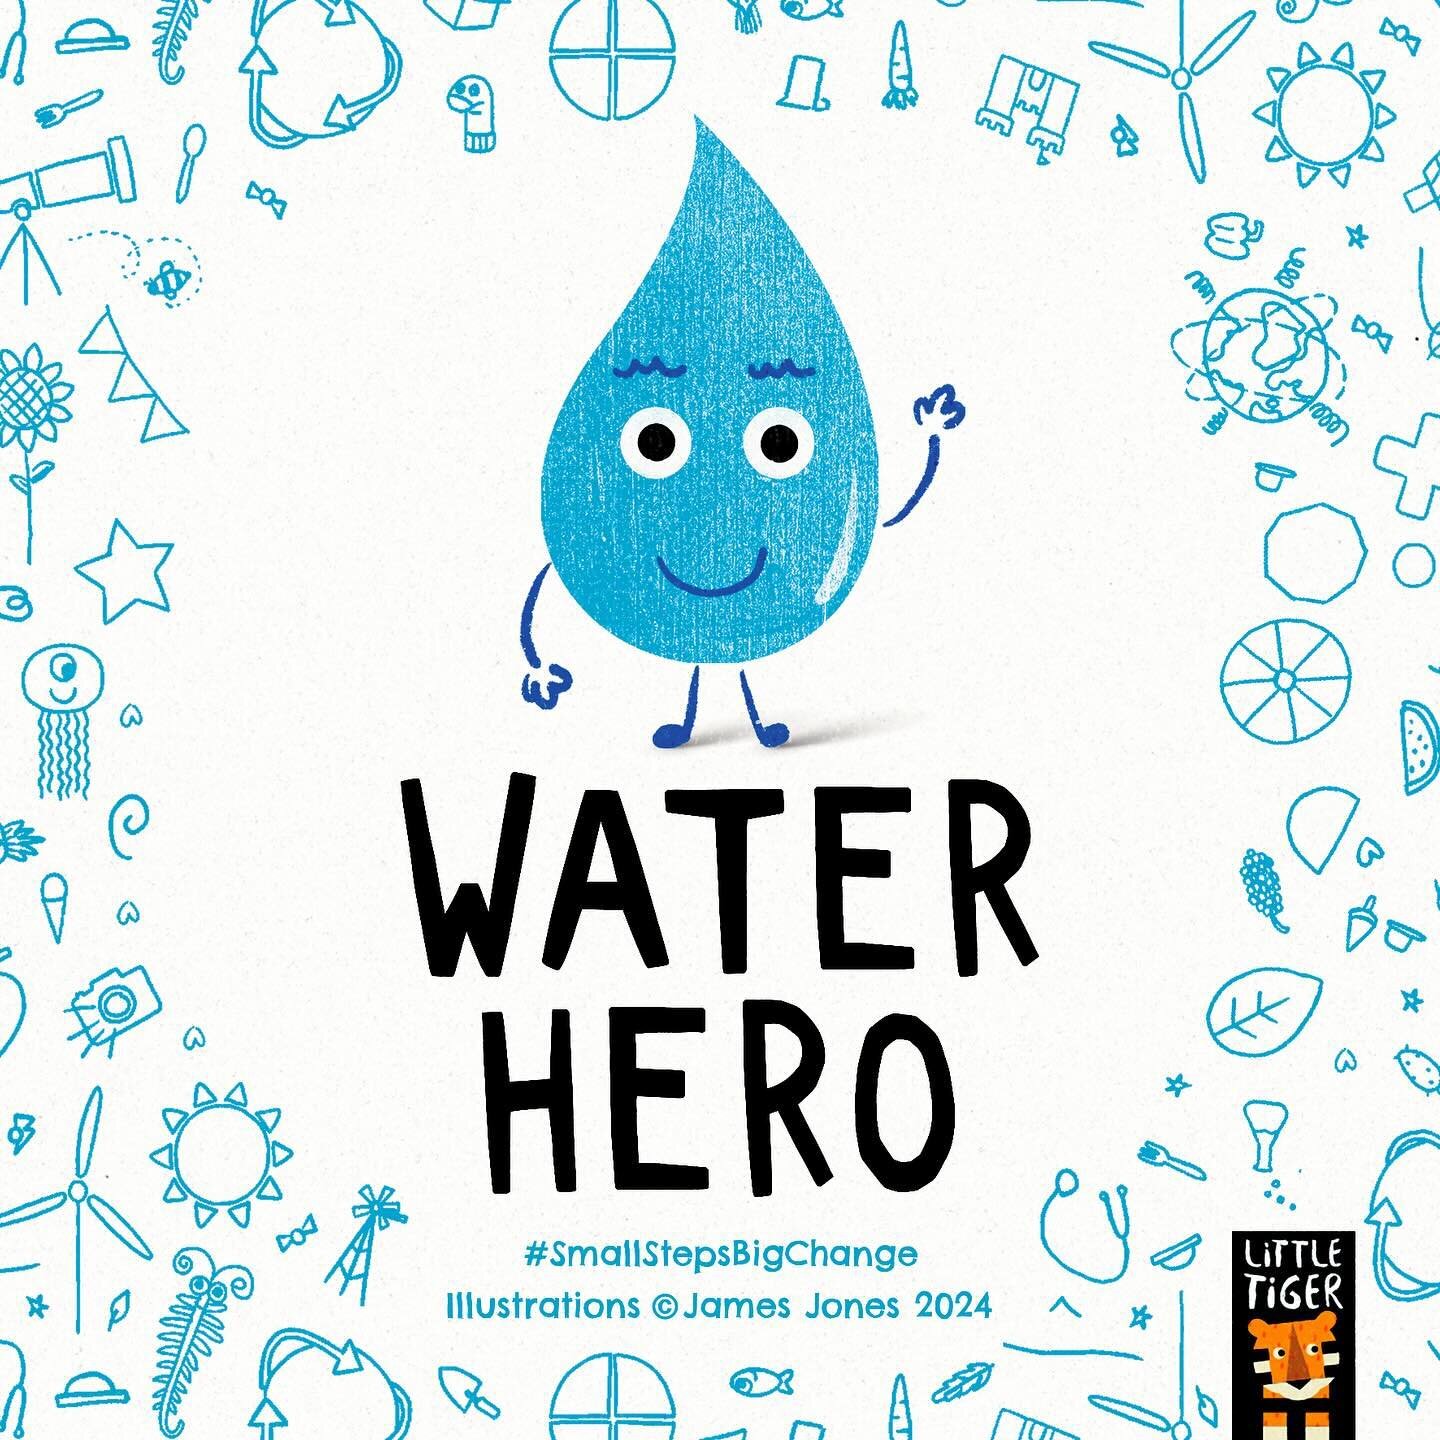 Introducing our Water Hero on #WorldWaterDay💧

One of our hero friends from #SmallStepsBigChange who are here to help guide your little ones on taking small steps to help protect the Earth 🌍, ourselves 🥰 and one another 🤗 

Swipe to see a sneak p